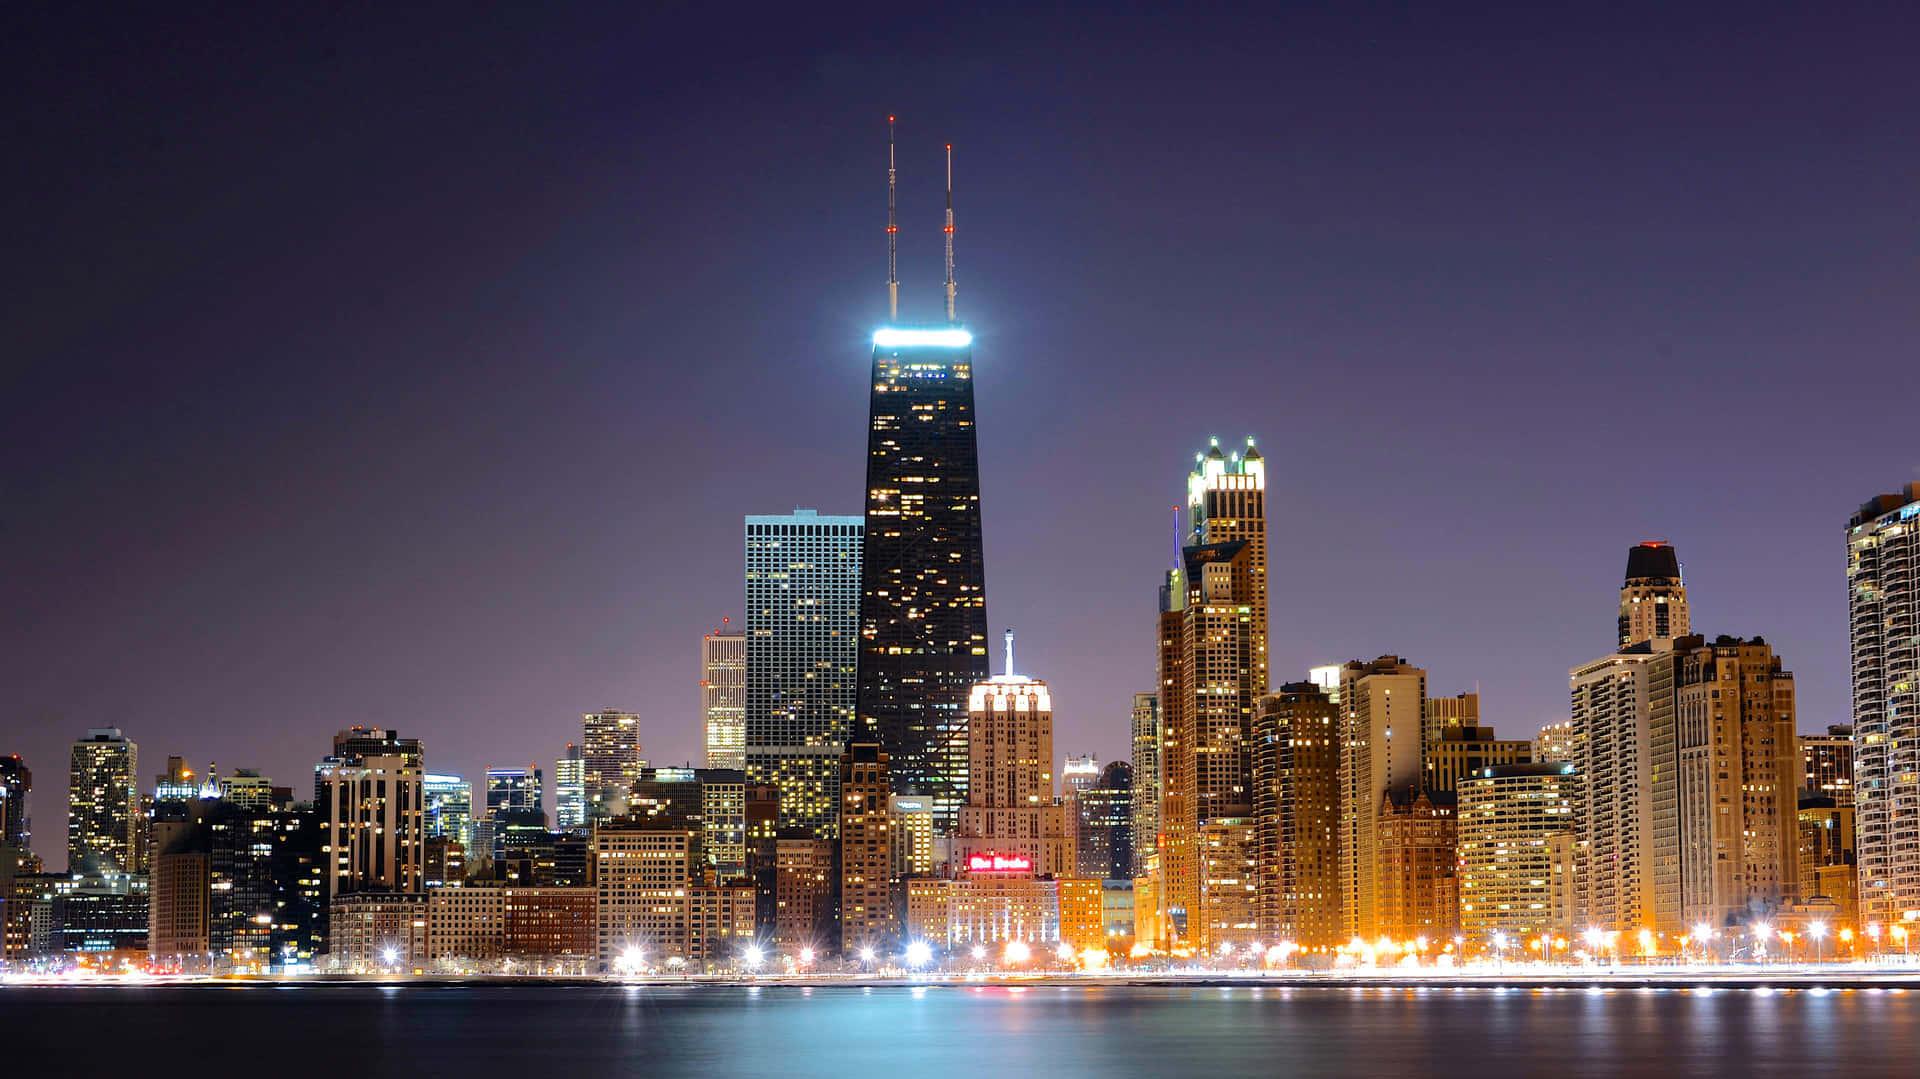 Take In The Stunning Sight Of Downtown Chicago From This